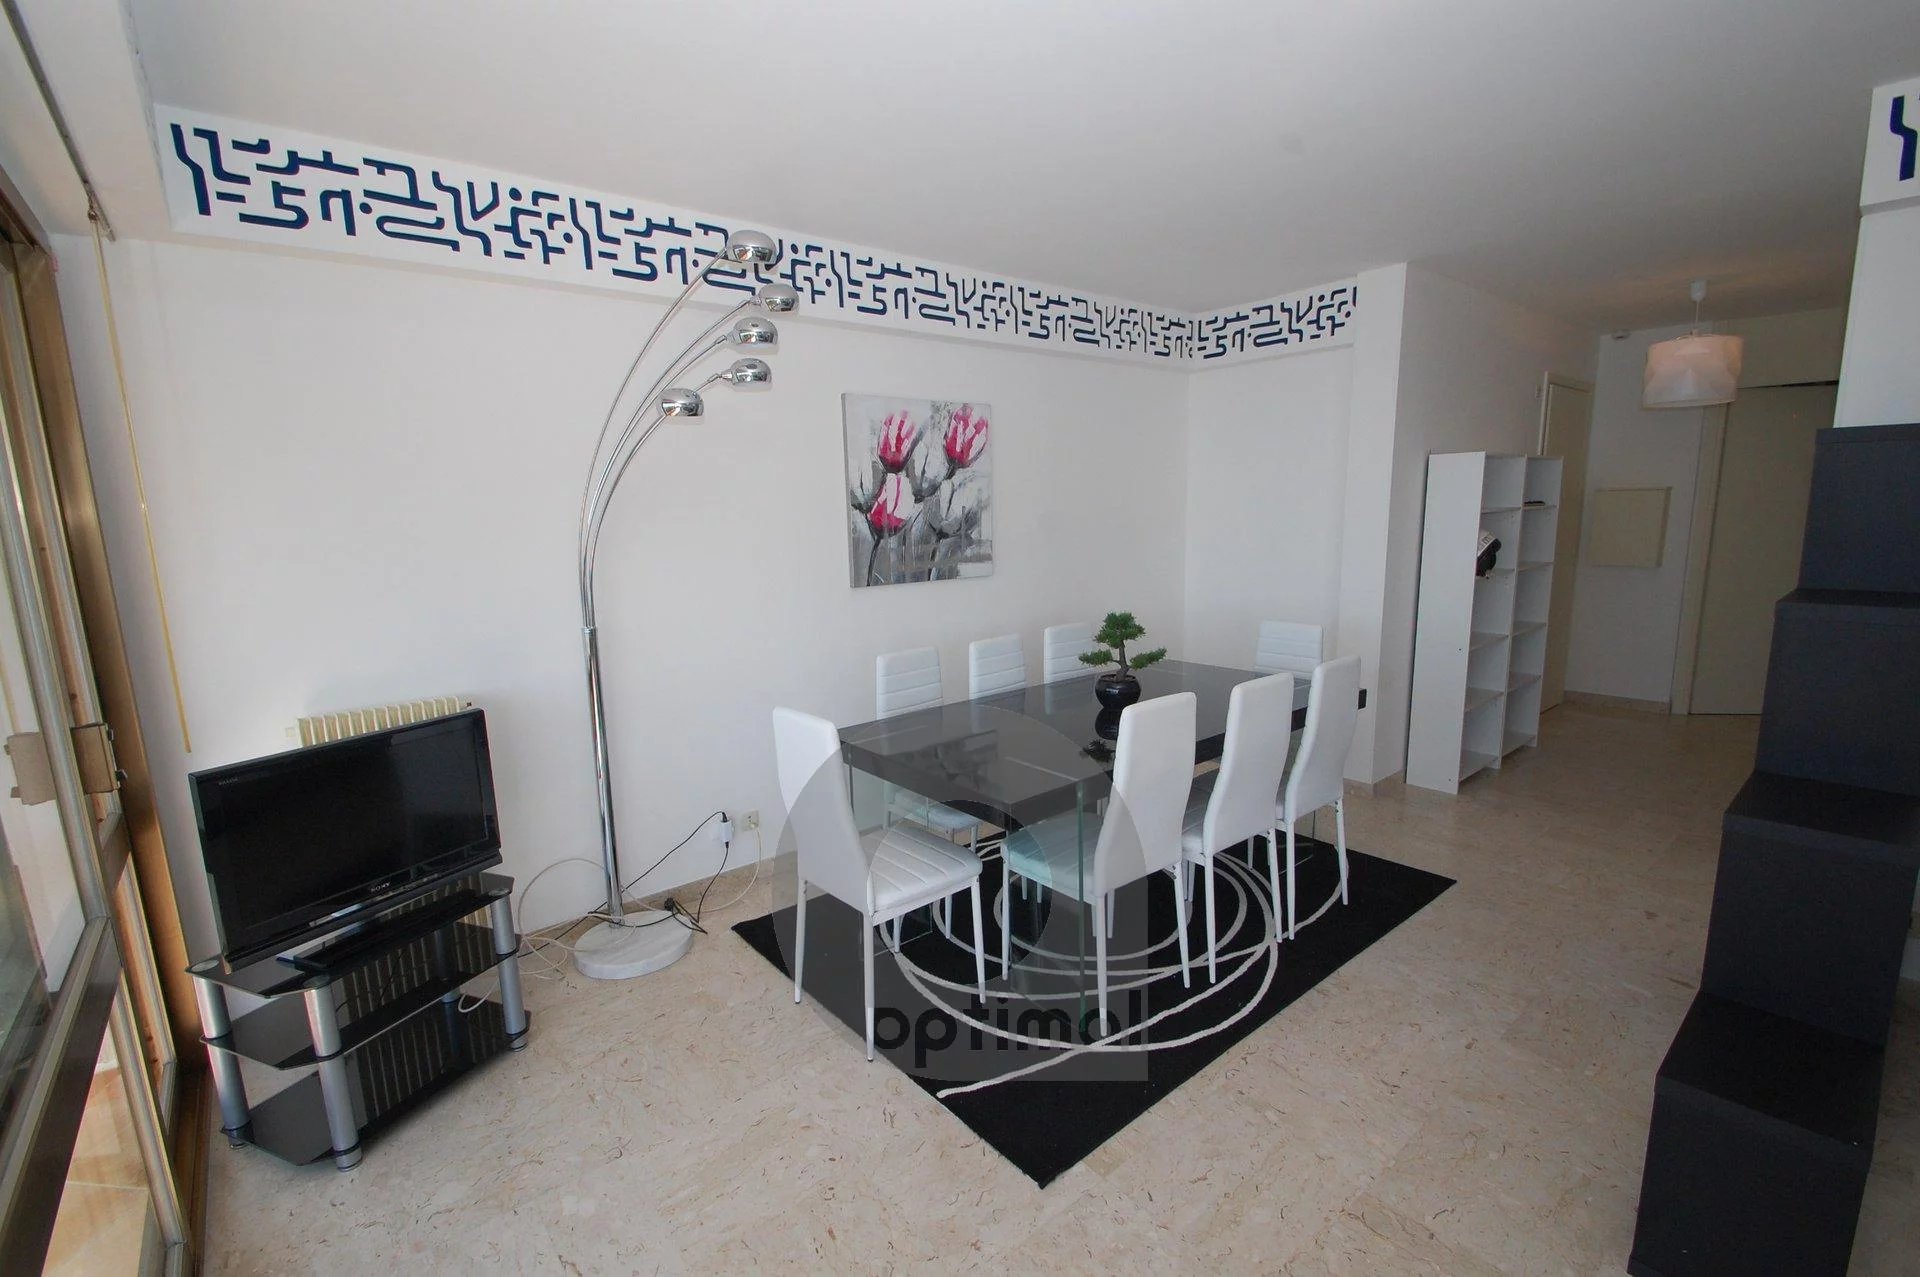 Beautiful and modern 2 rooms apartment with big seafront terrace and private parking place